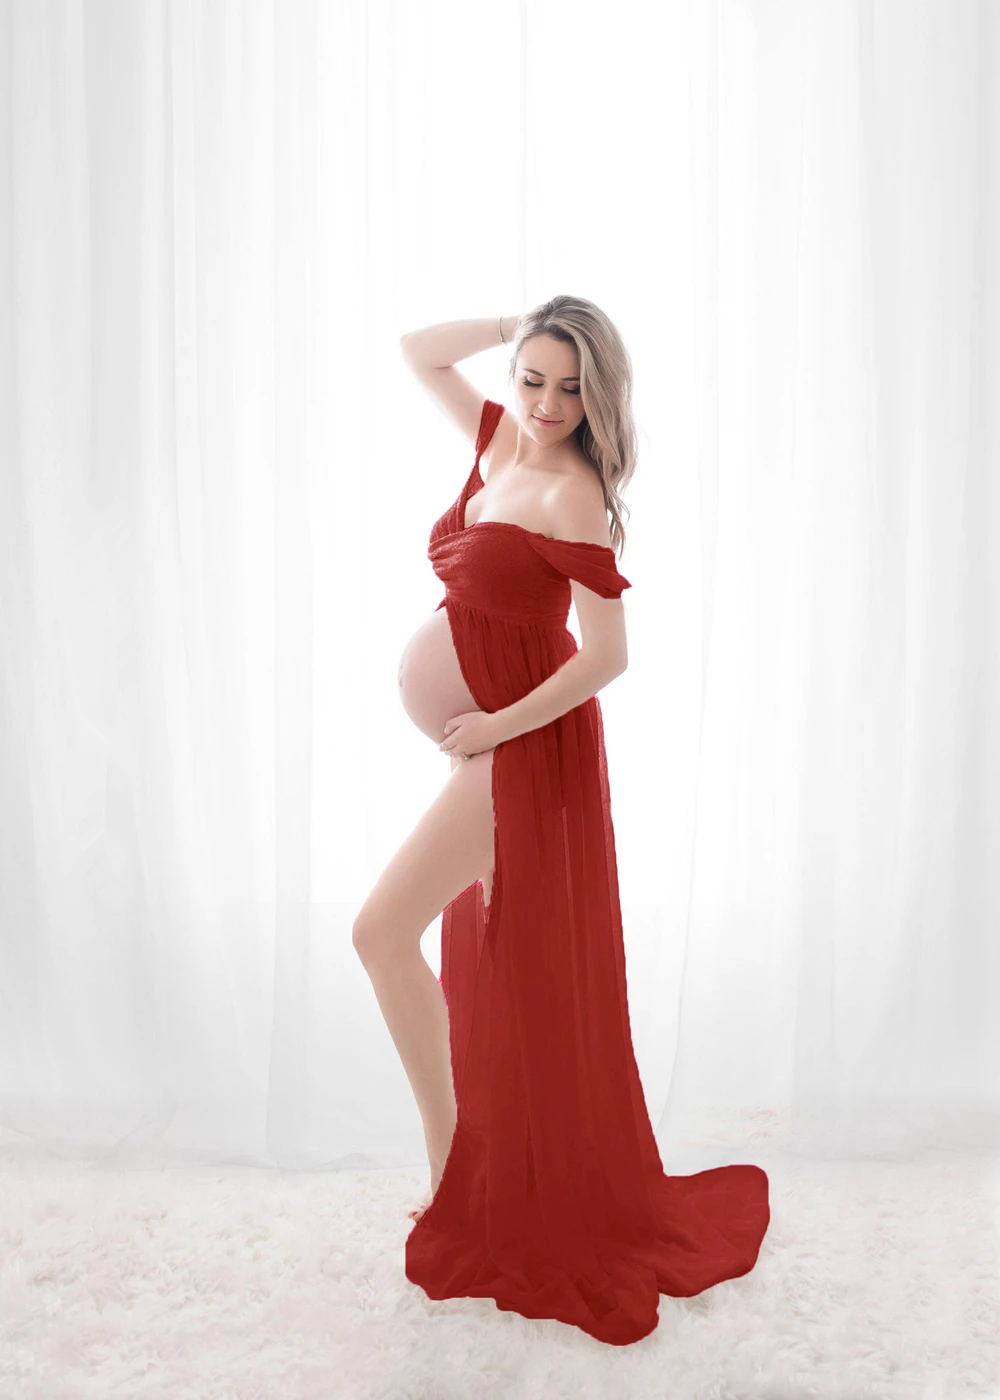 Shoulderless Maternity Dress For Photography Sexy Front Split Pregnancy Dresses For Women Maxi Maternity Gown Photo Shoots Props (6)